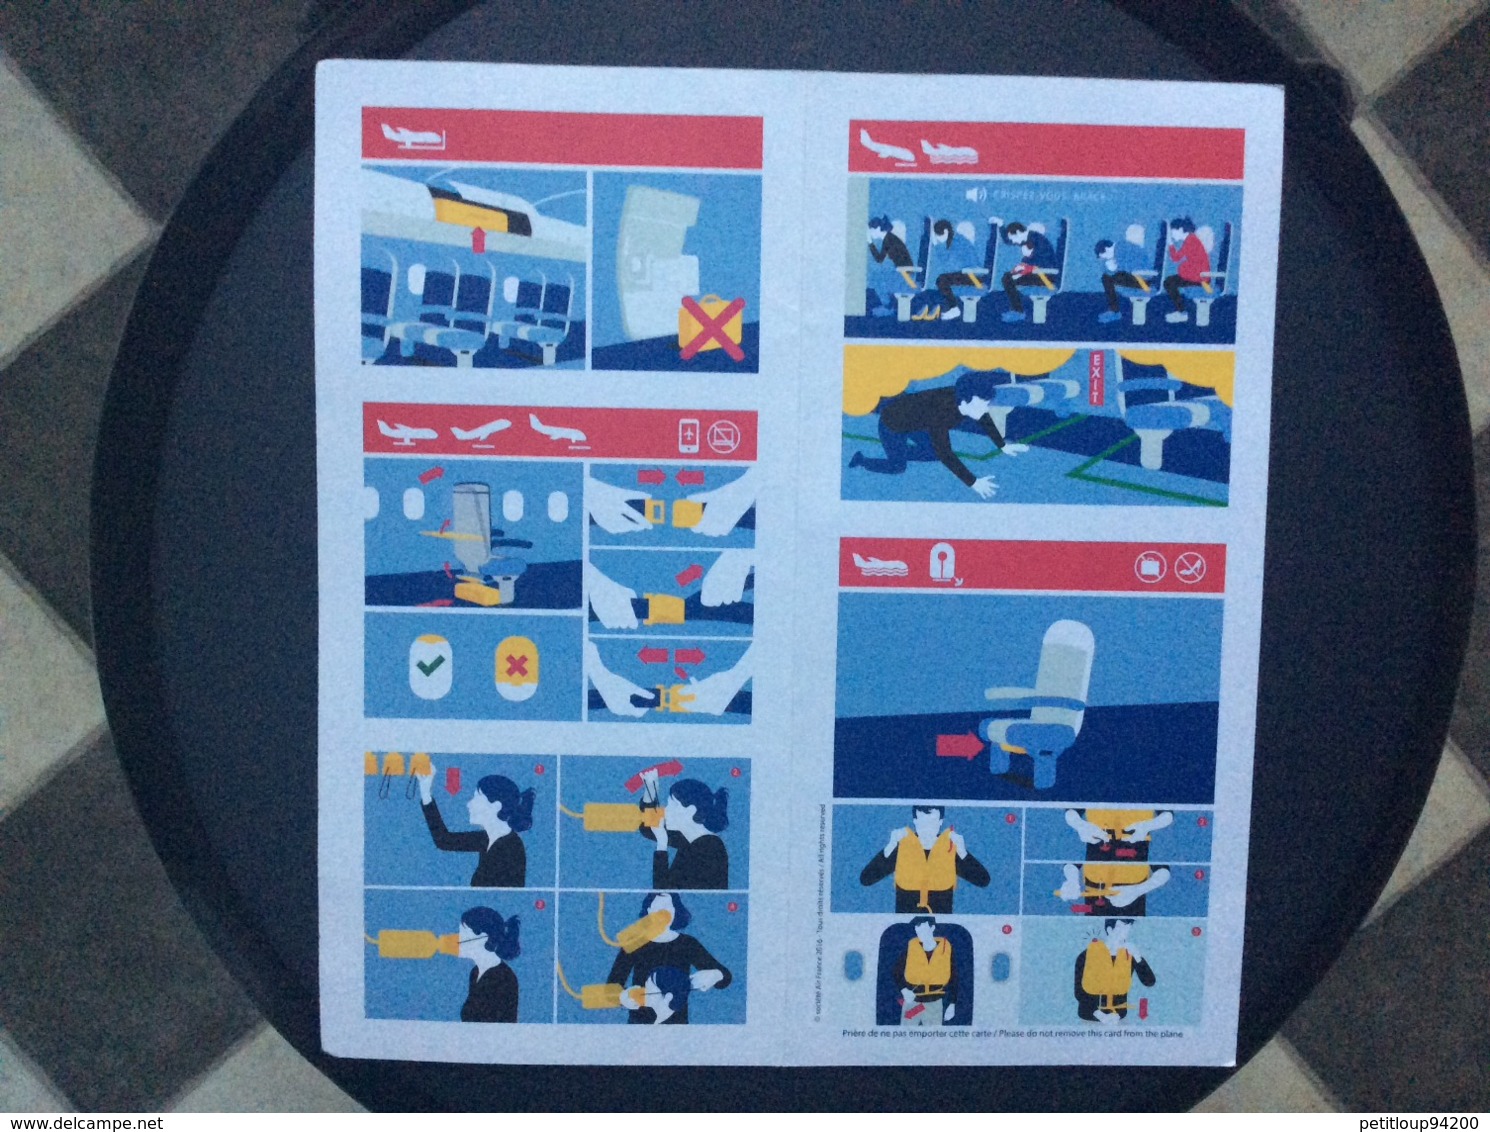 CONSIGNES DE SECURITE / SAFETY CARD  *Airbus A 320   AIR FRANCE  JOON - Safety Cards